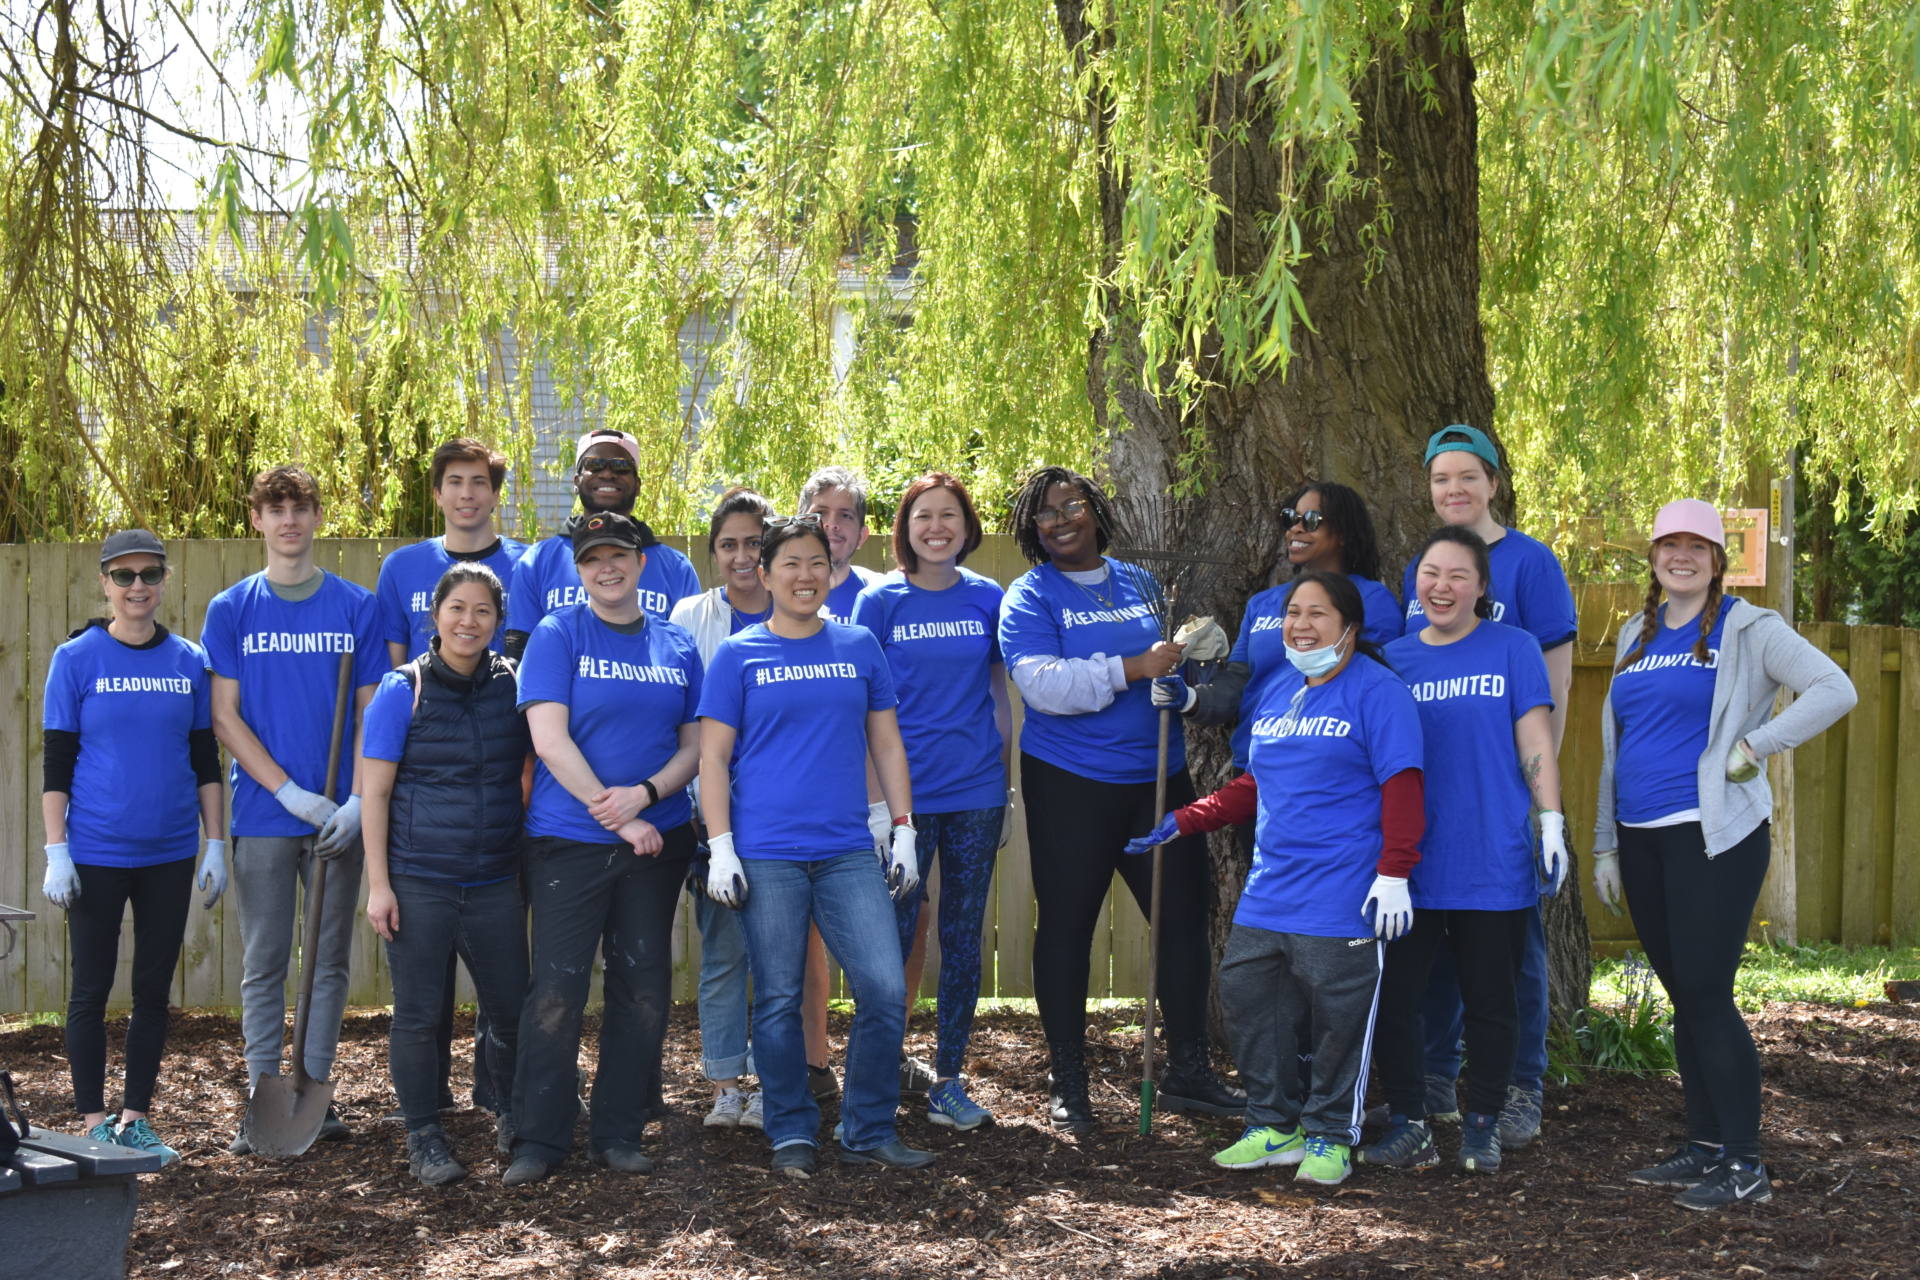 United Way of King County volunteers at an Earth Day event